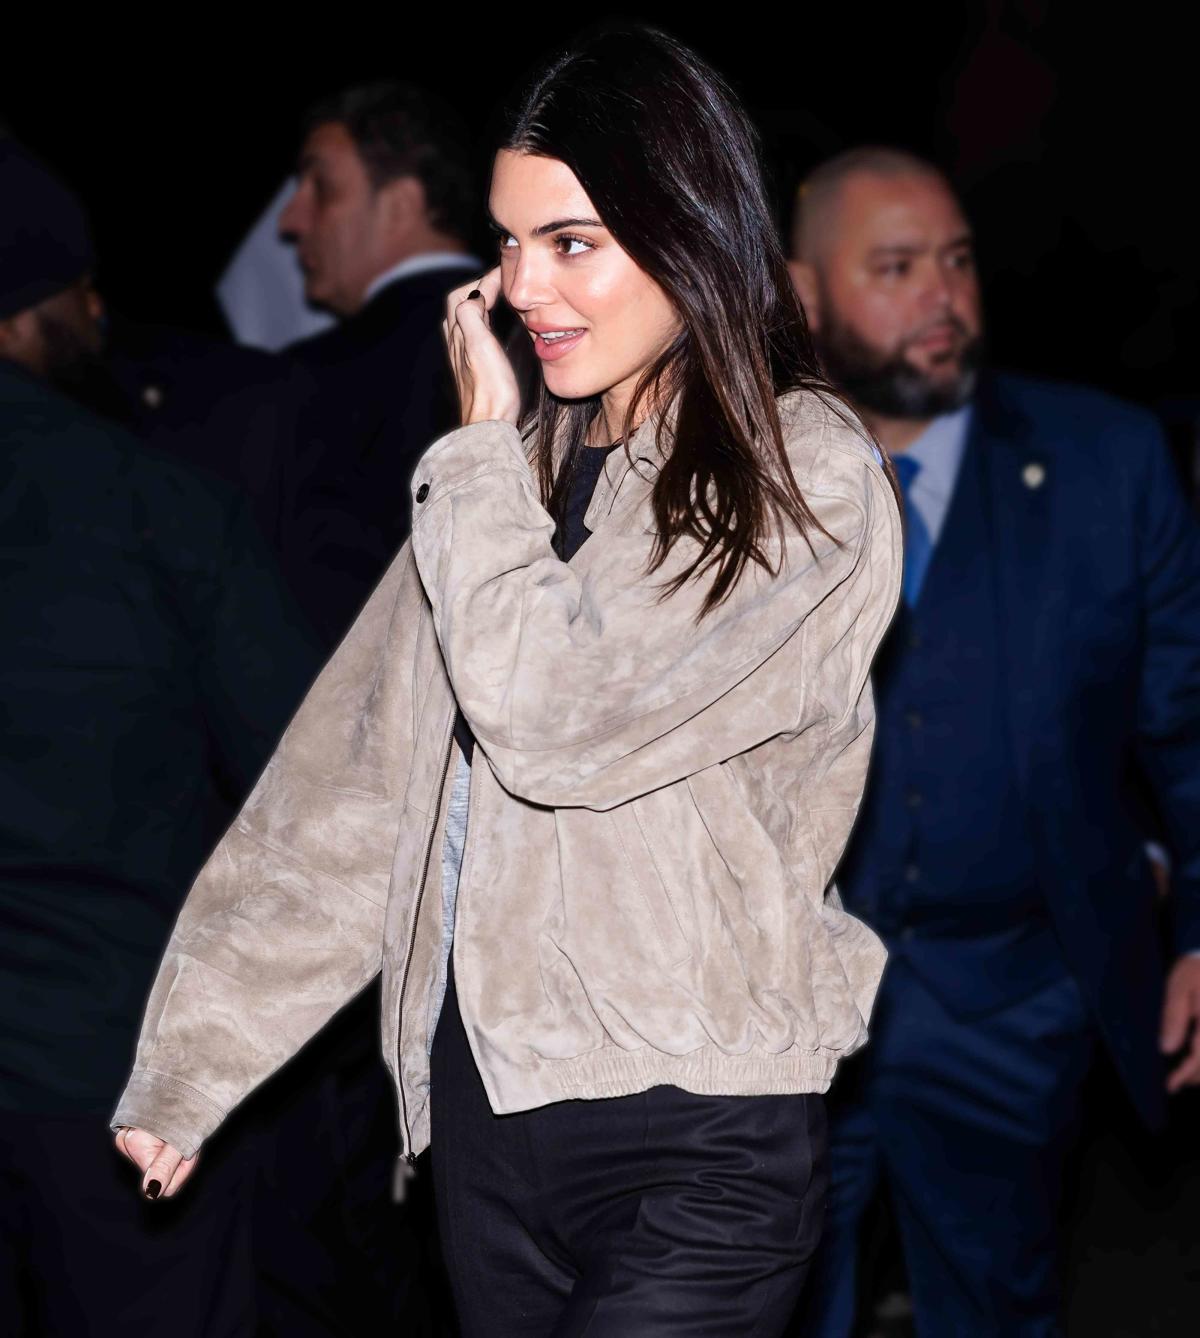 Kendall Jenner cuts a casual figure in an oversized blue jumper as